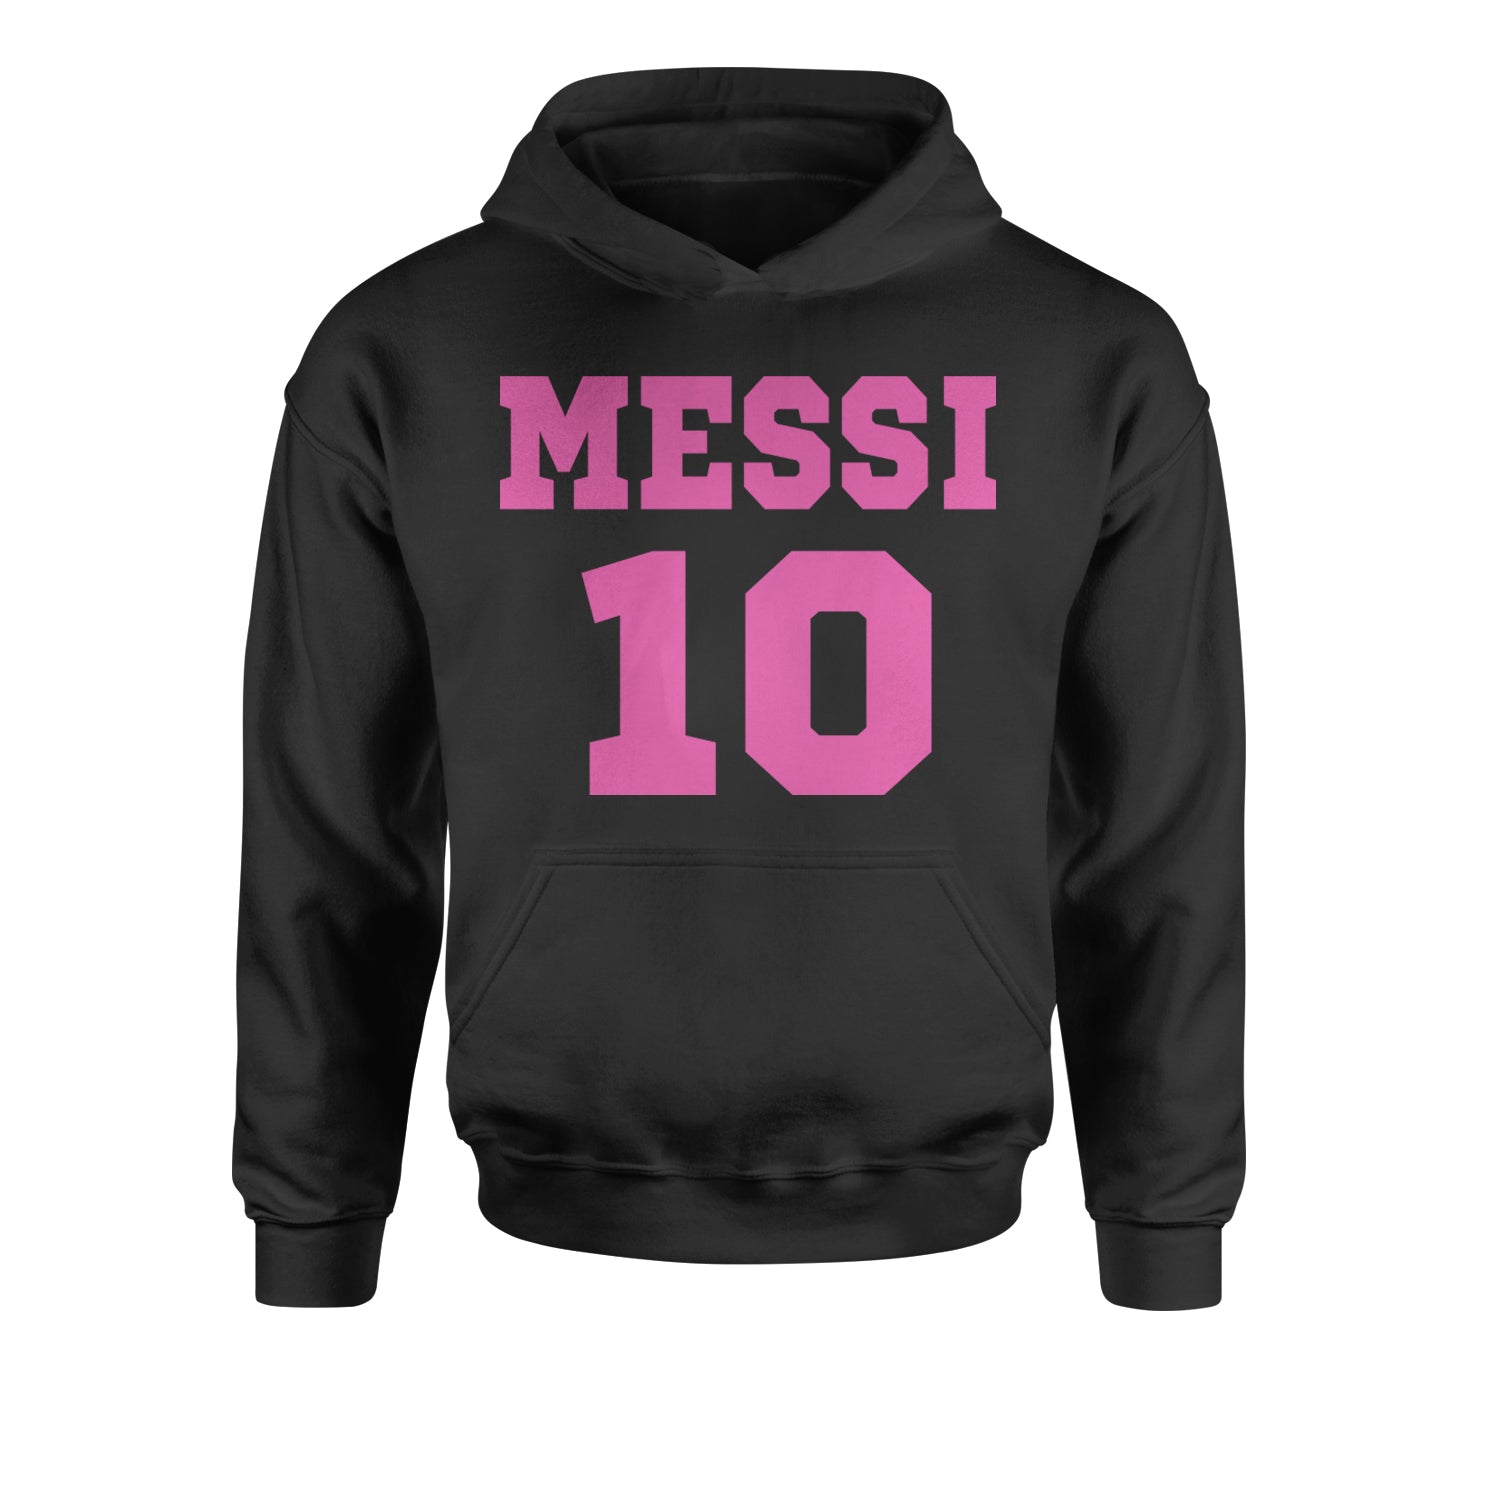 Messi World Soccer Futbol Messiami Youth-Sized Hoodie